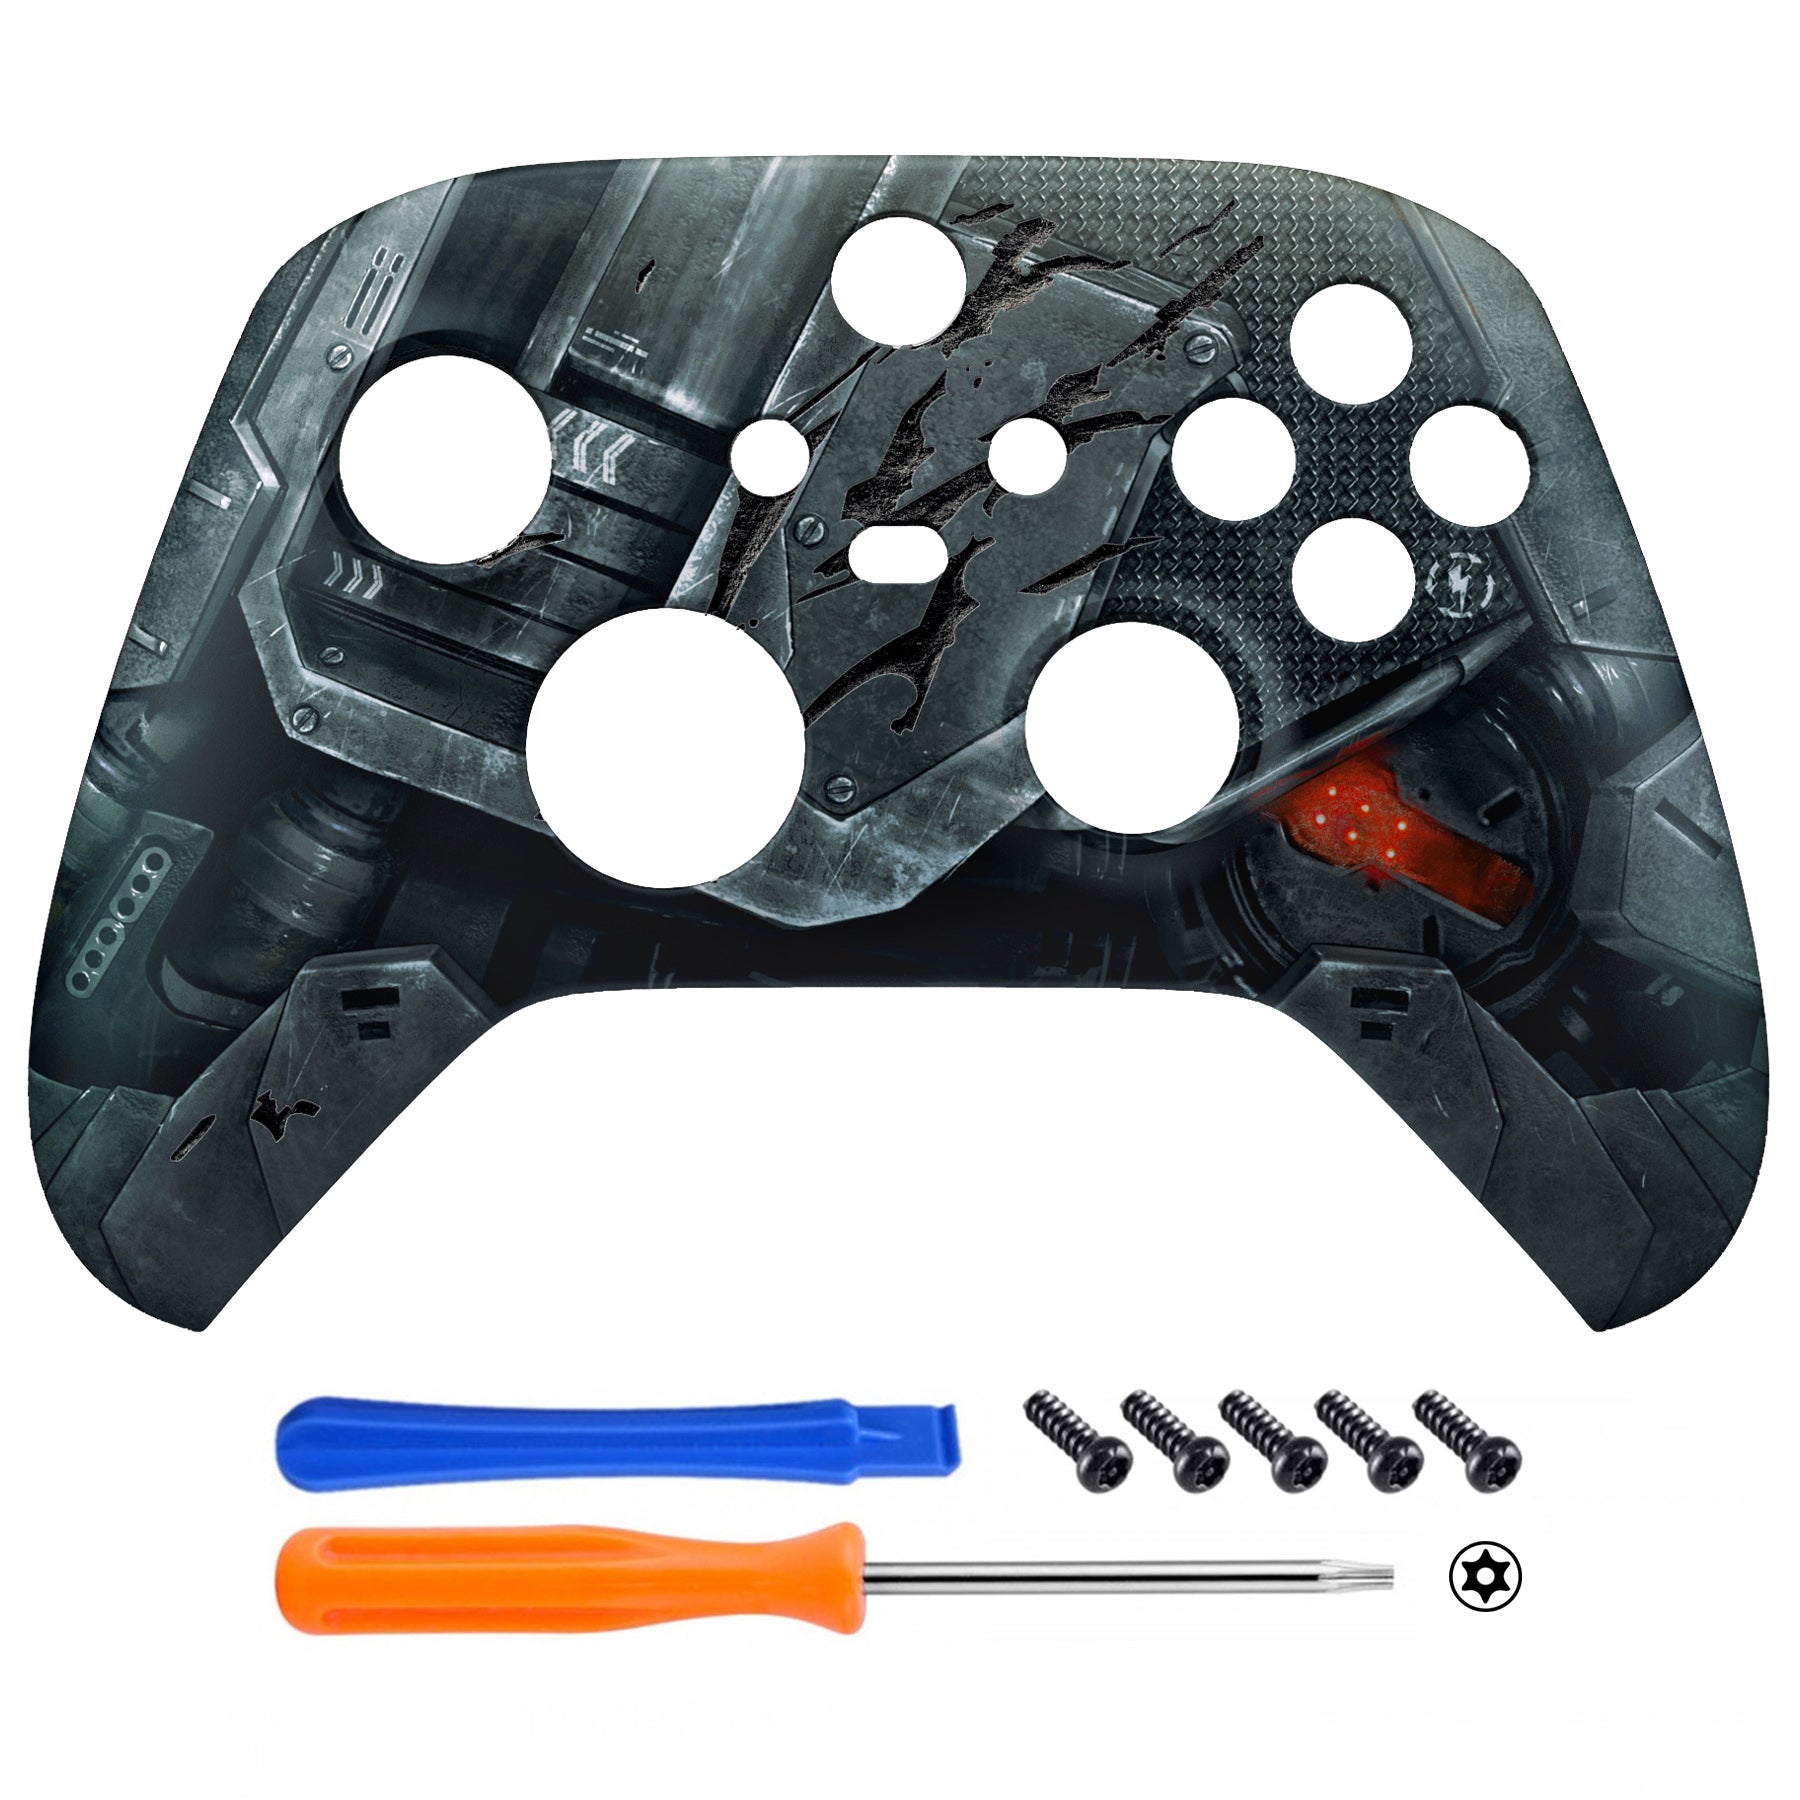 eXtremeRate Replacement Front Housing Shell for Xbox Series X & S Controller - Mecha Armor with Combat Damage Engrave eXtremeRate